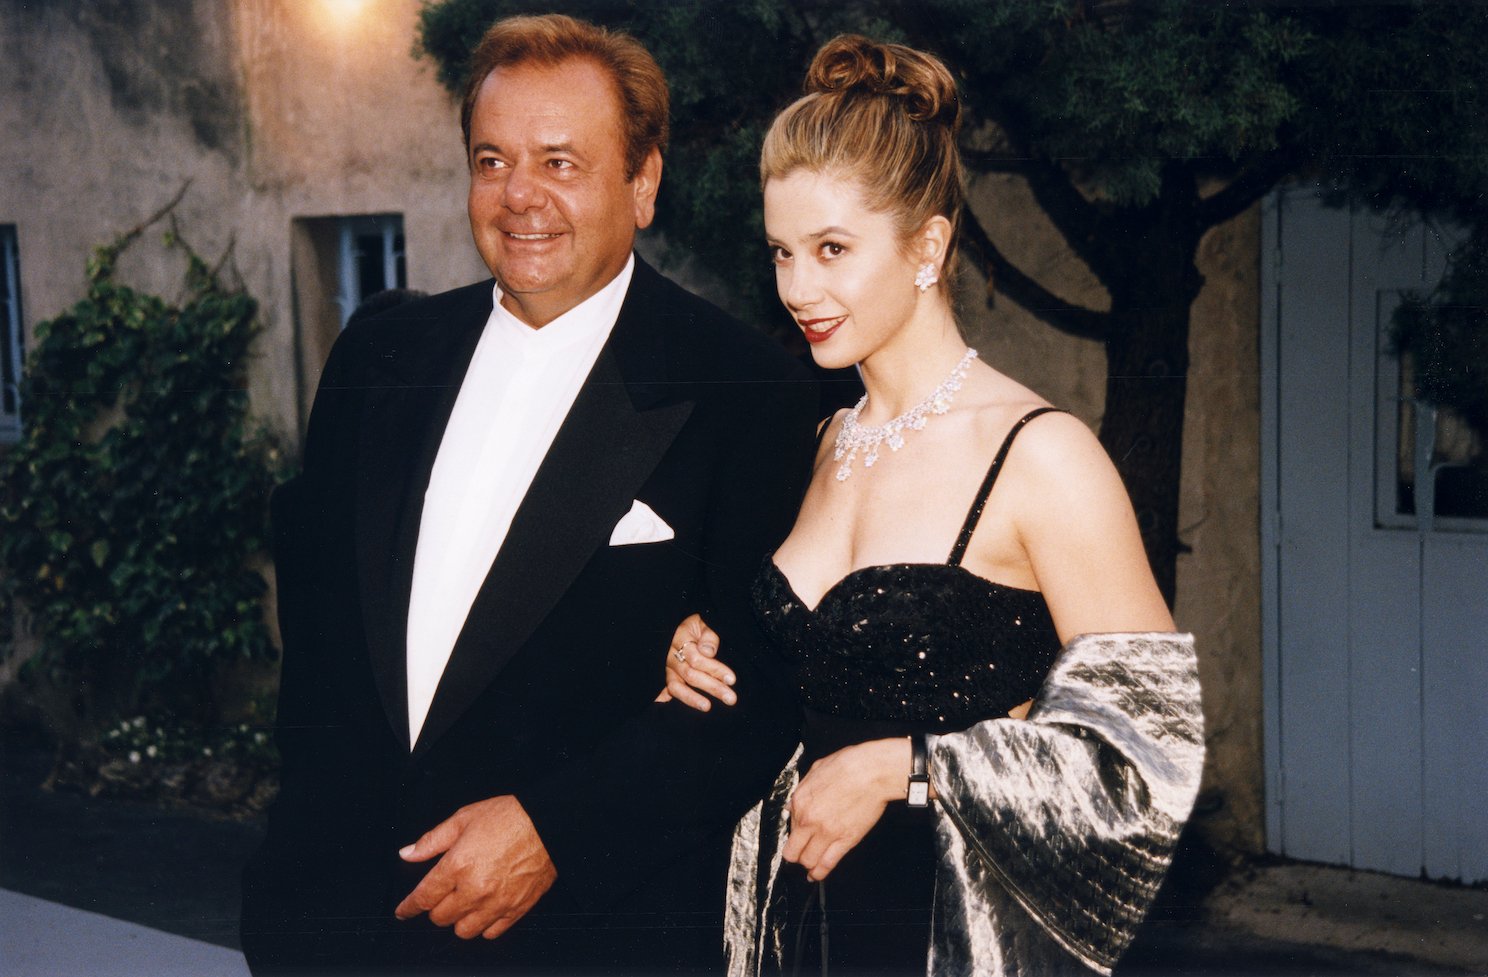 Paul Sorvino and daughter Mira Sorvino in formal attire at an event